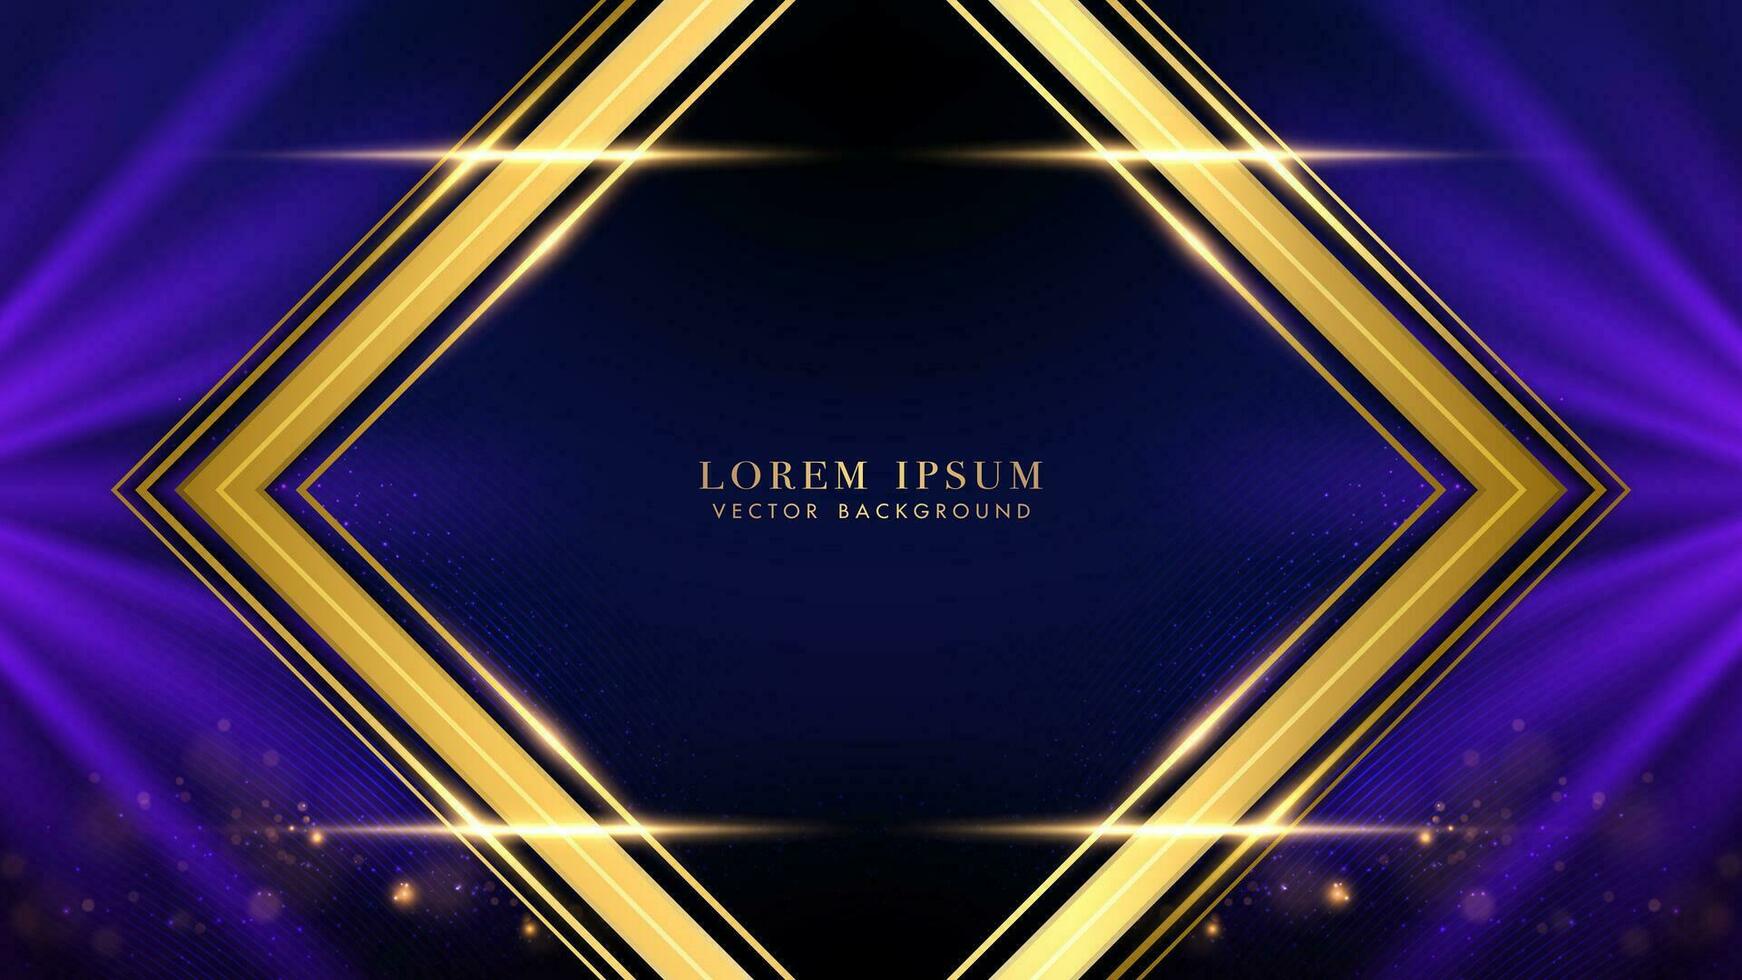 Luxury style design background with square golden frame, blue beam and sparkle glowing effect decoration vector